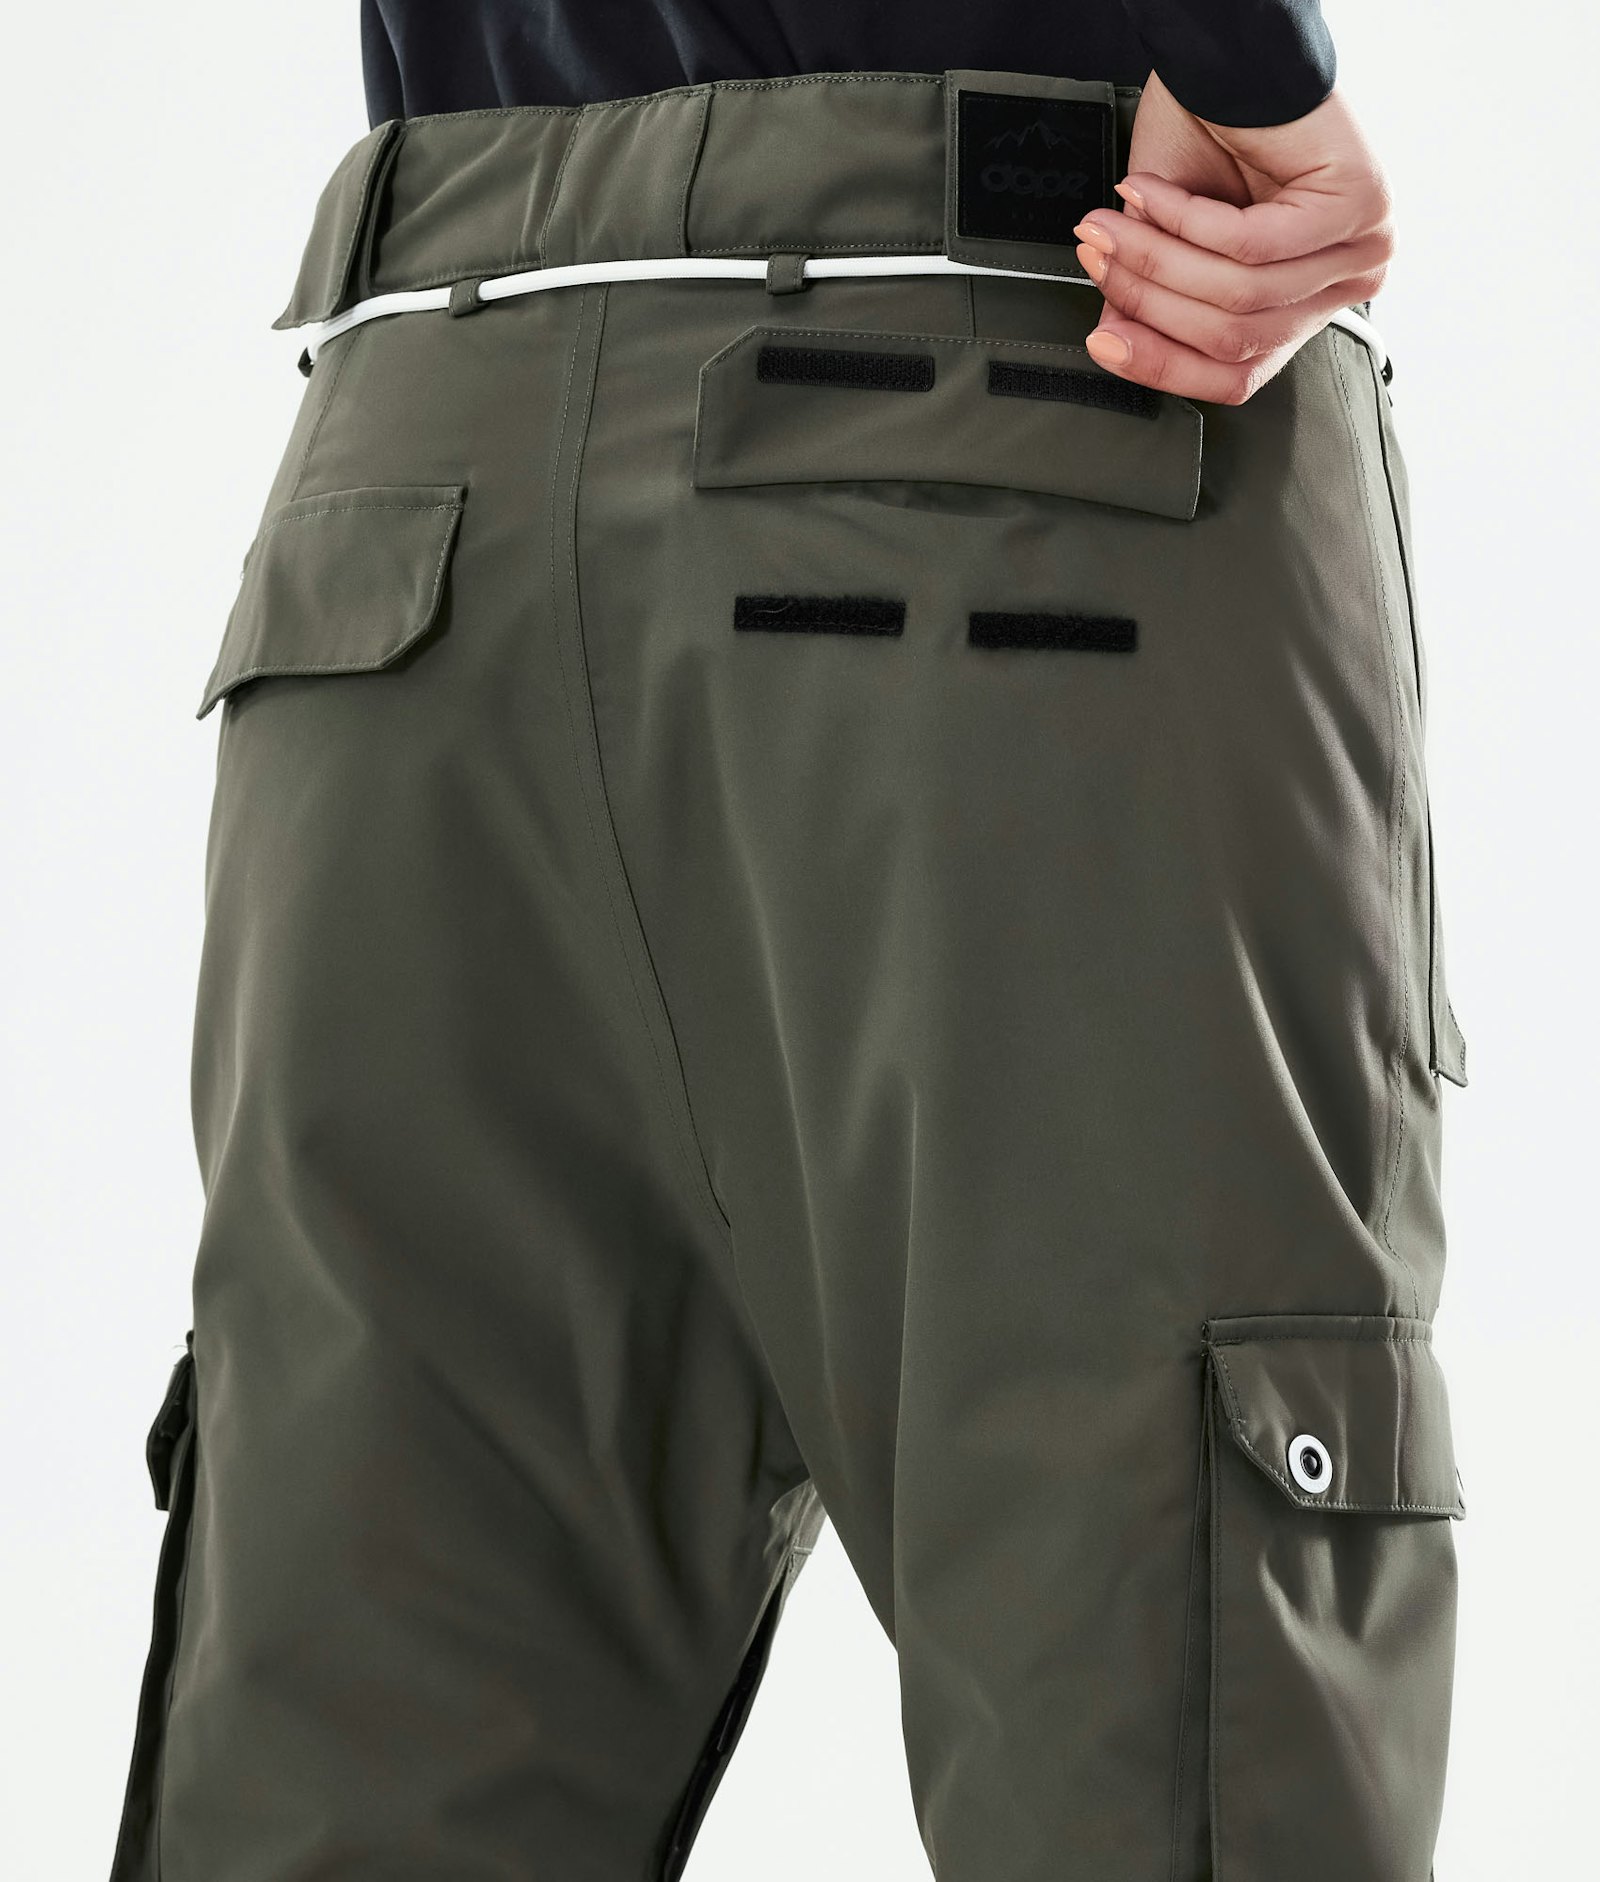 Dope Iconic W 2021 Snowboard Pants Women Olive Green, Image 6 of 6